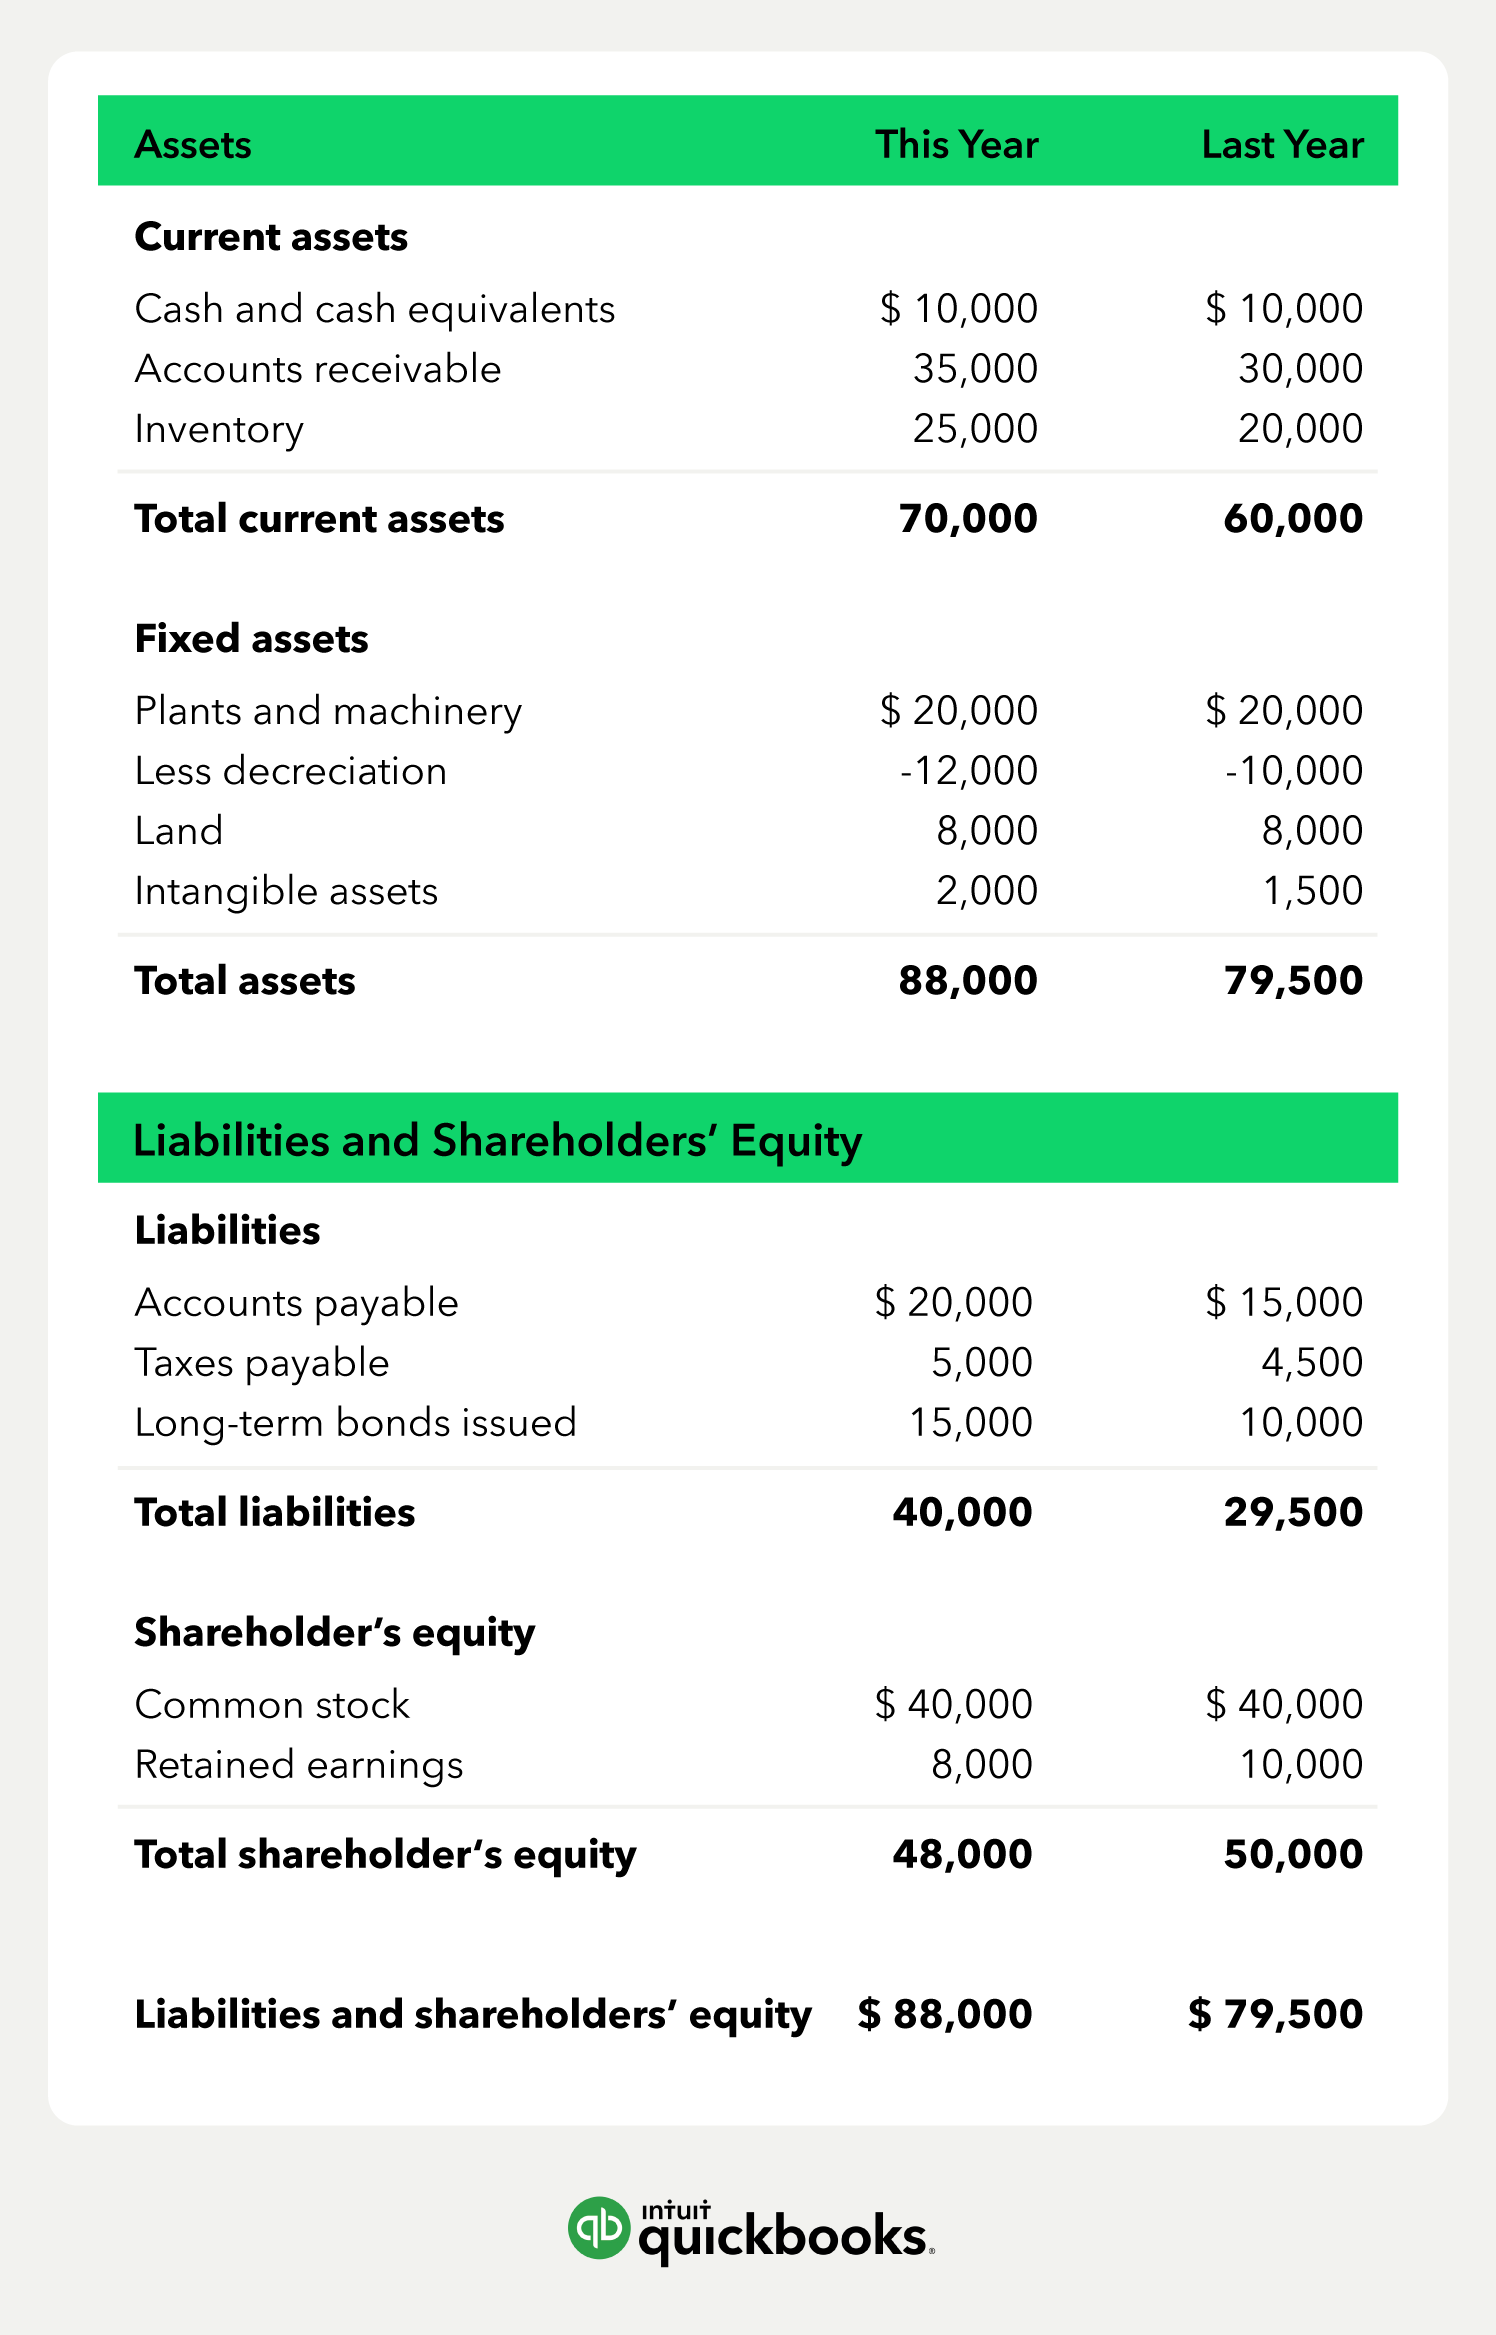 A balance sheet example shows assets in columns comparing this year and last year. Under assets, the statement includes current assets (cash and cash equivalents, accounts receivable, inventory), and fixed assets (plants and machinery, less depreciation, land, intangible assets). Under liabilities and shareholders’ equity are liabilities (accounts payable, taxes payable, long-term bonds issued) and shareholder’s equity (common stock, retained earnings).